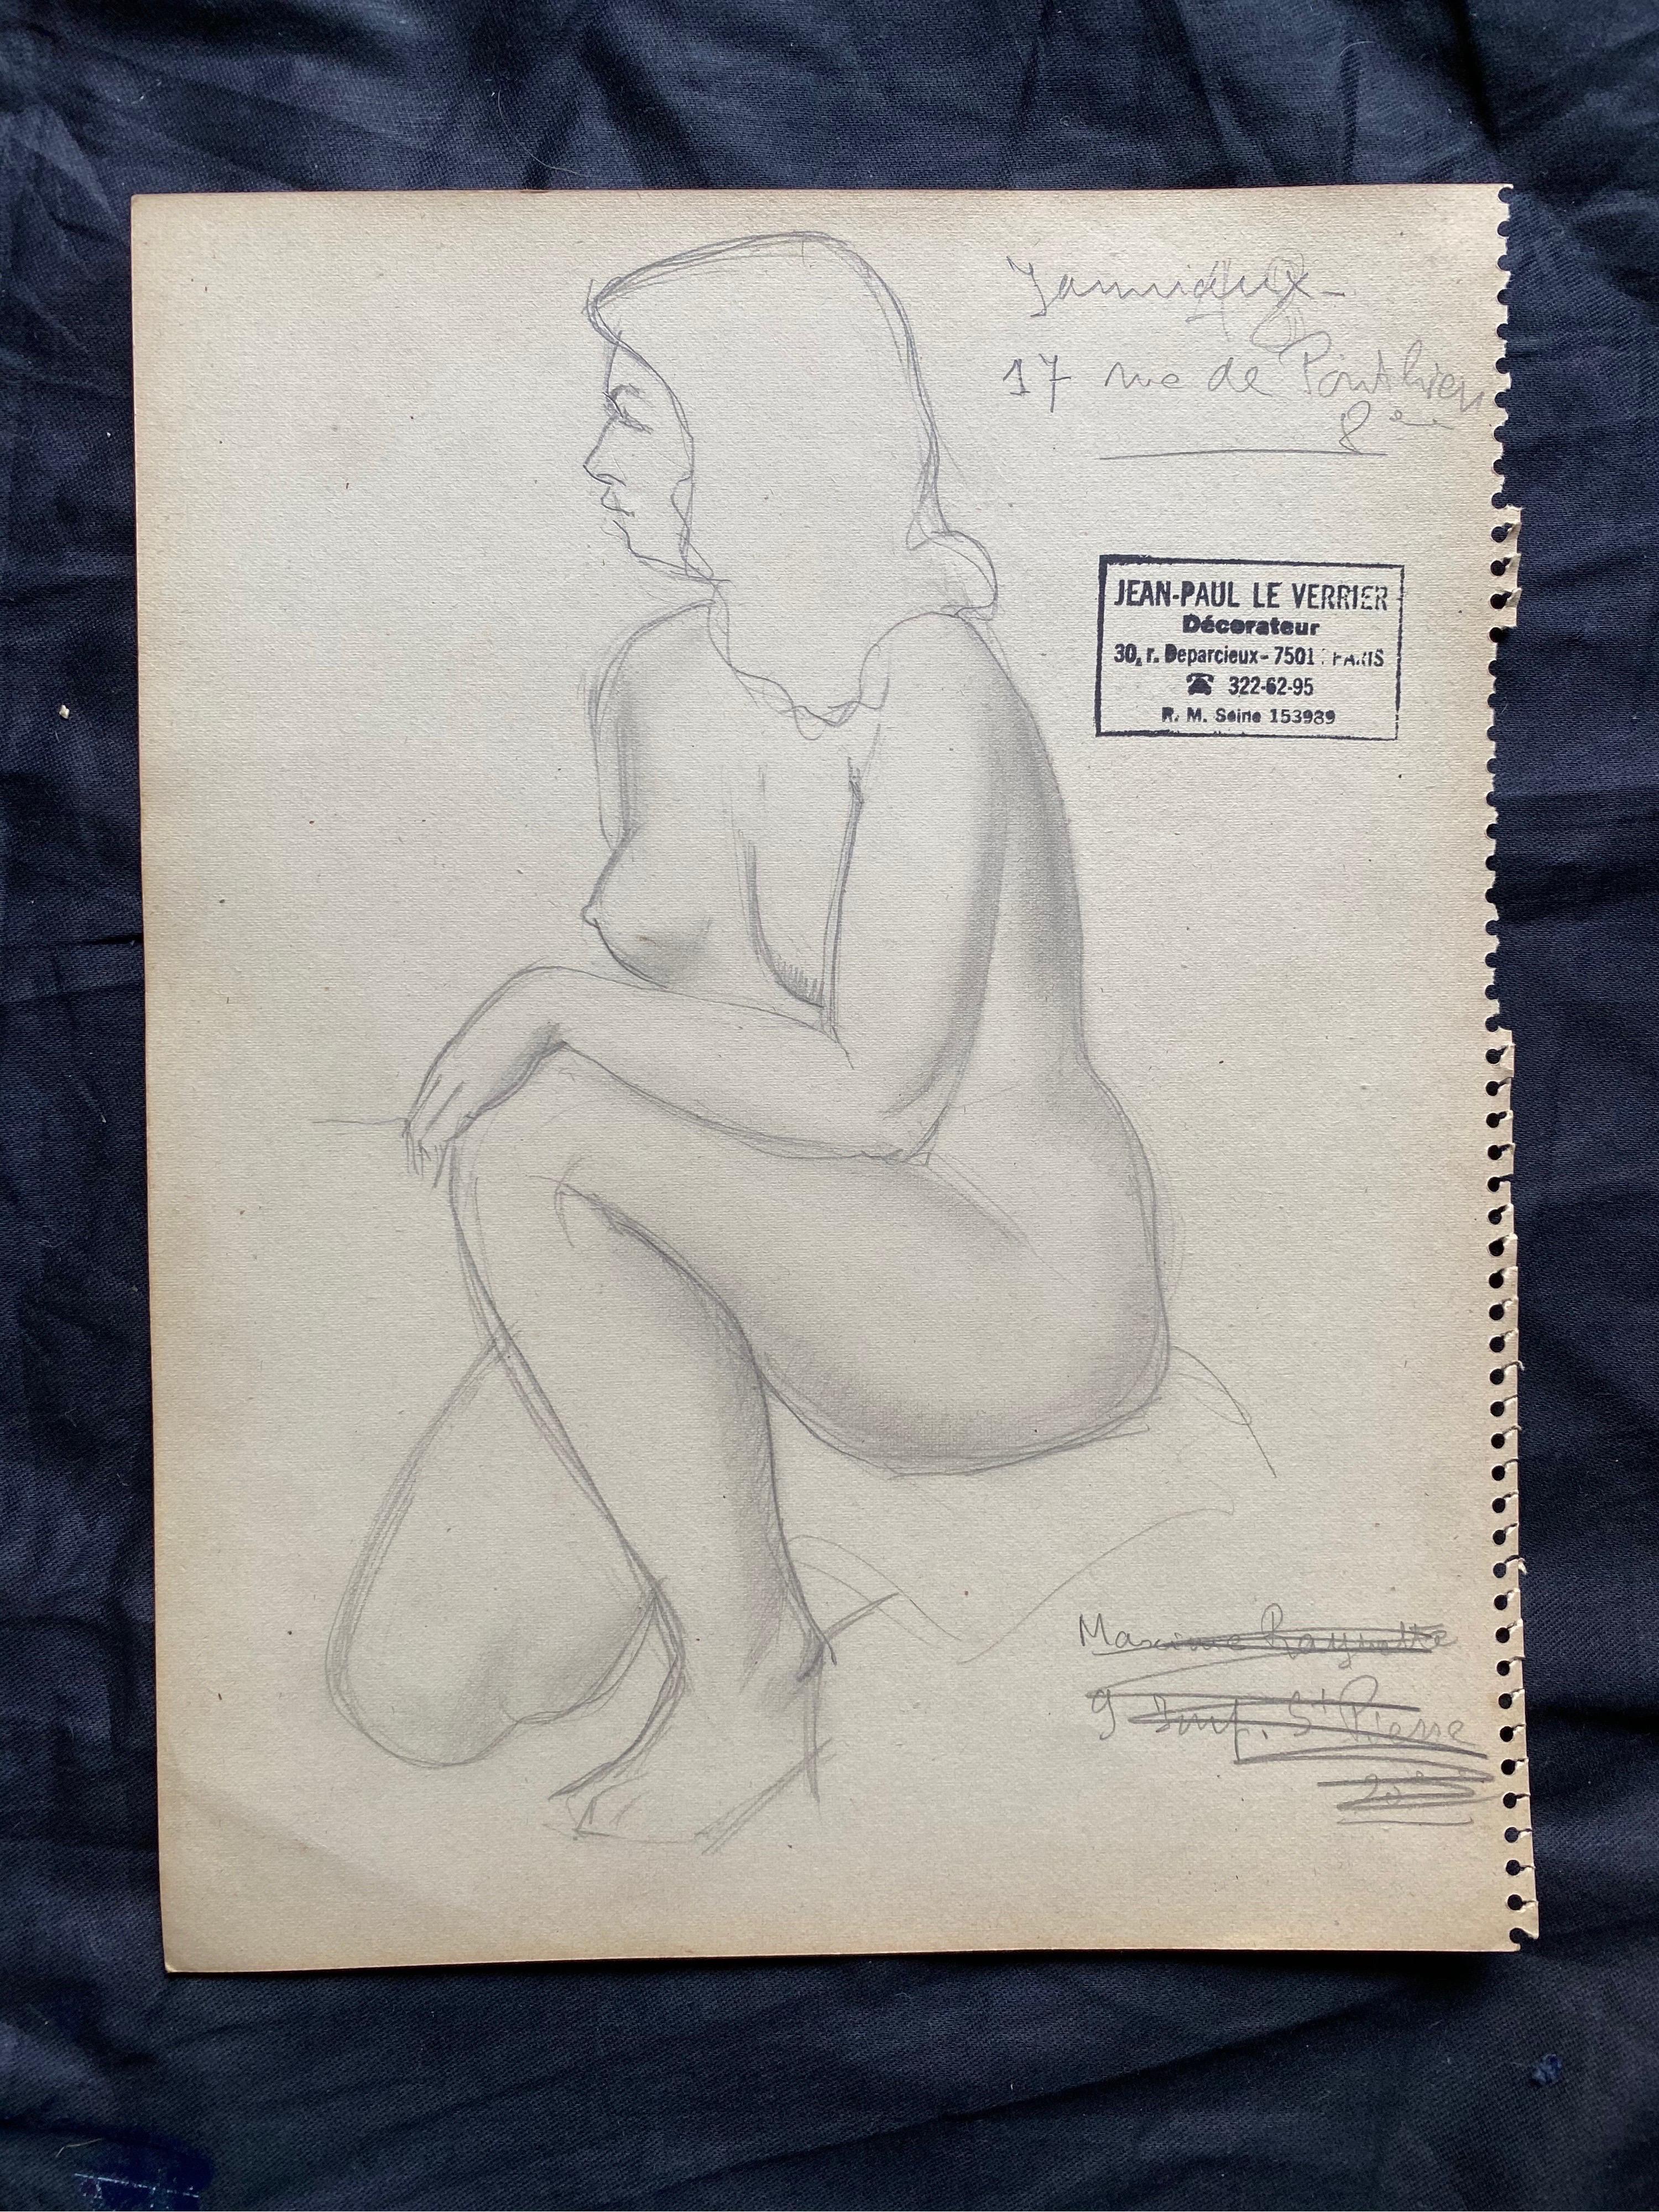 Portrait sketch.
Original drawing by Jean-Paul LE VERRIER (1922-1996)
Studio stamped.
Inscribed verso.
Pencil drawing on paper, unframed.
Double sided.
Measures: 10.5 x 8.25 inches.

provenance: private collection of the artists work,